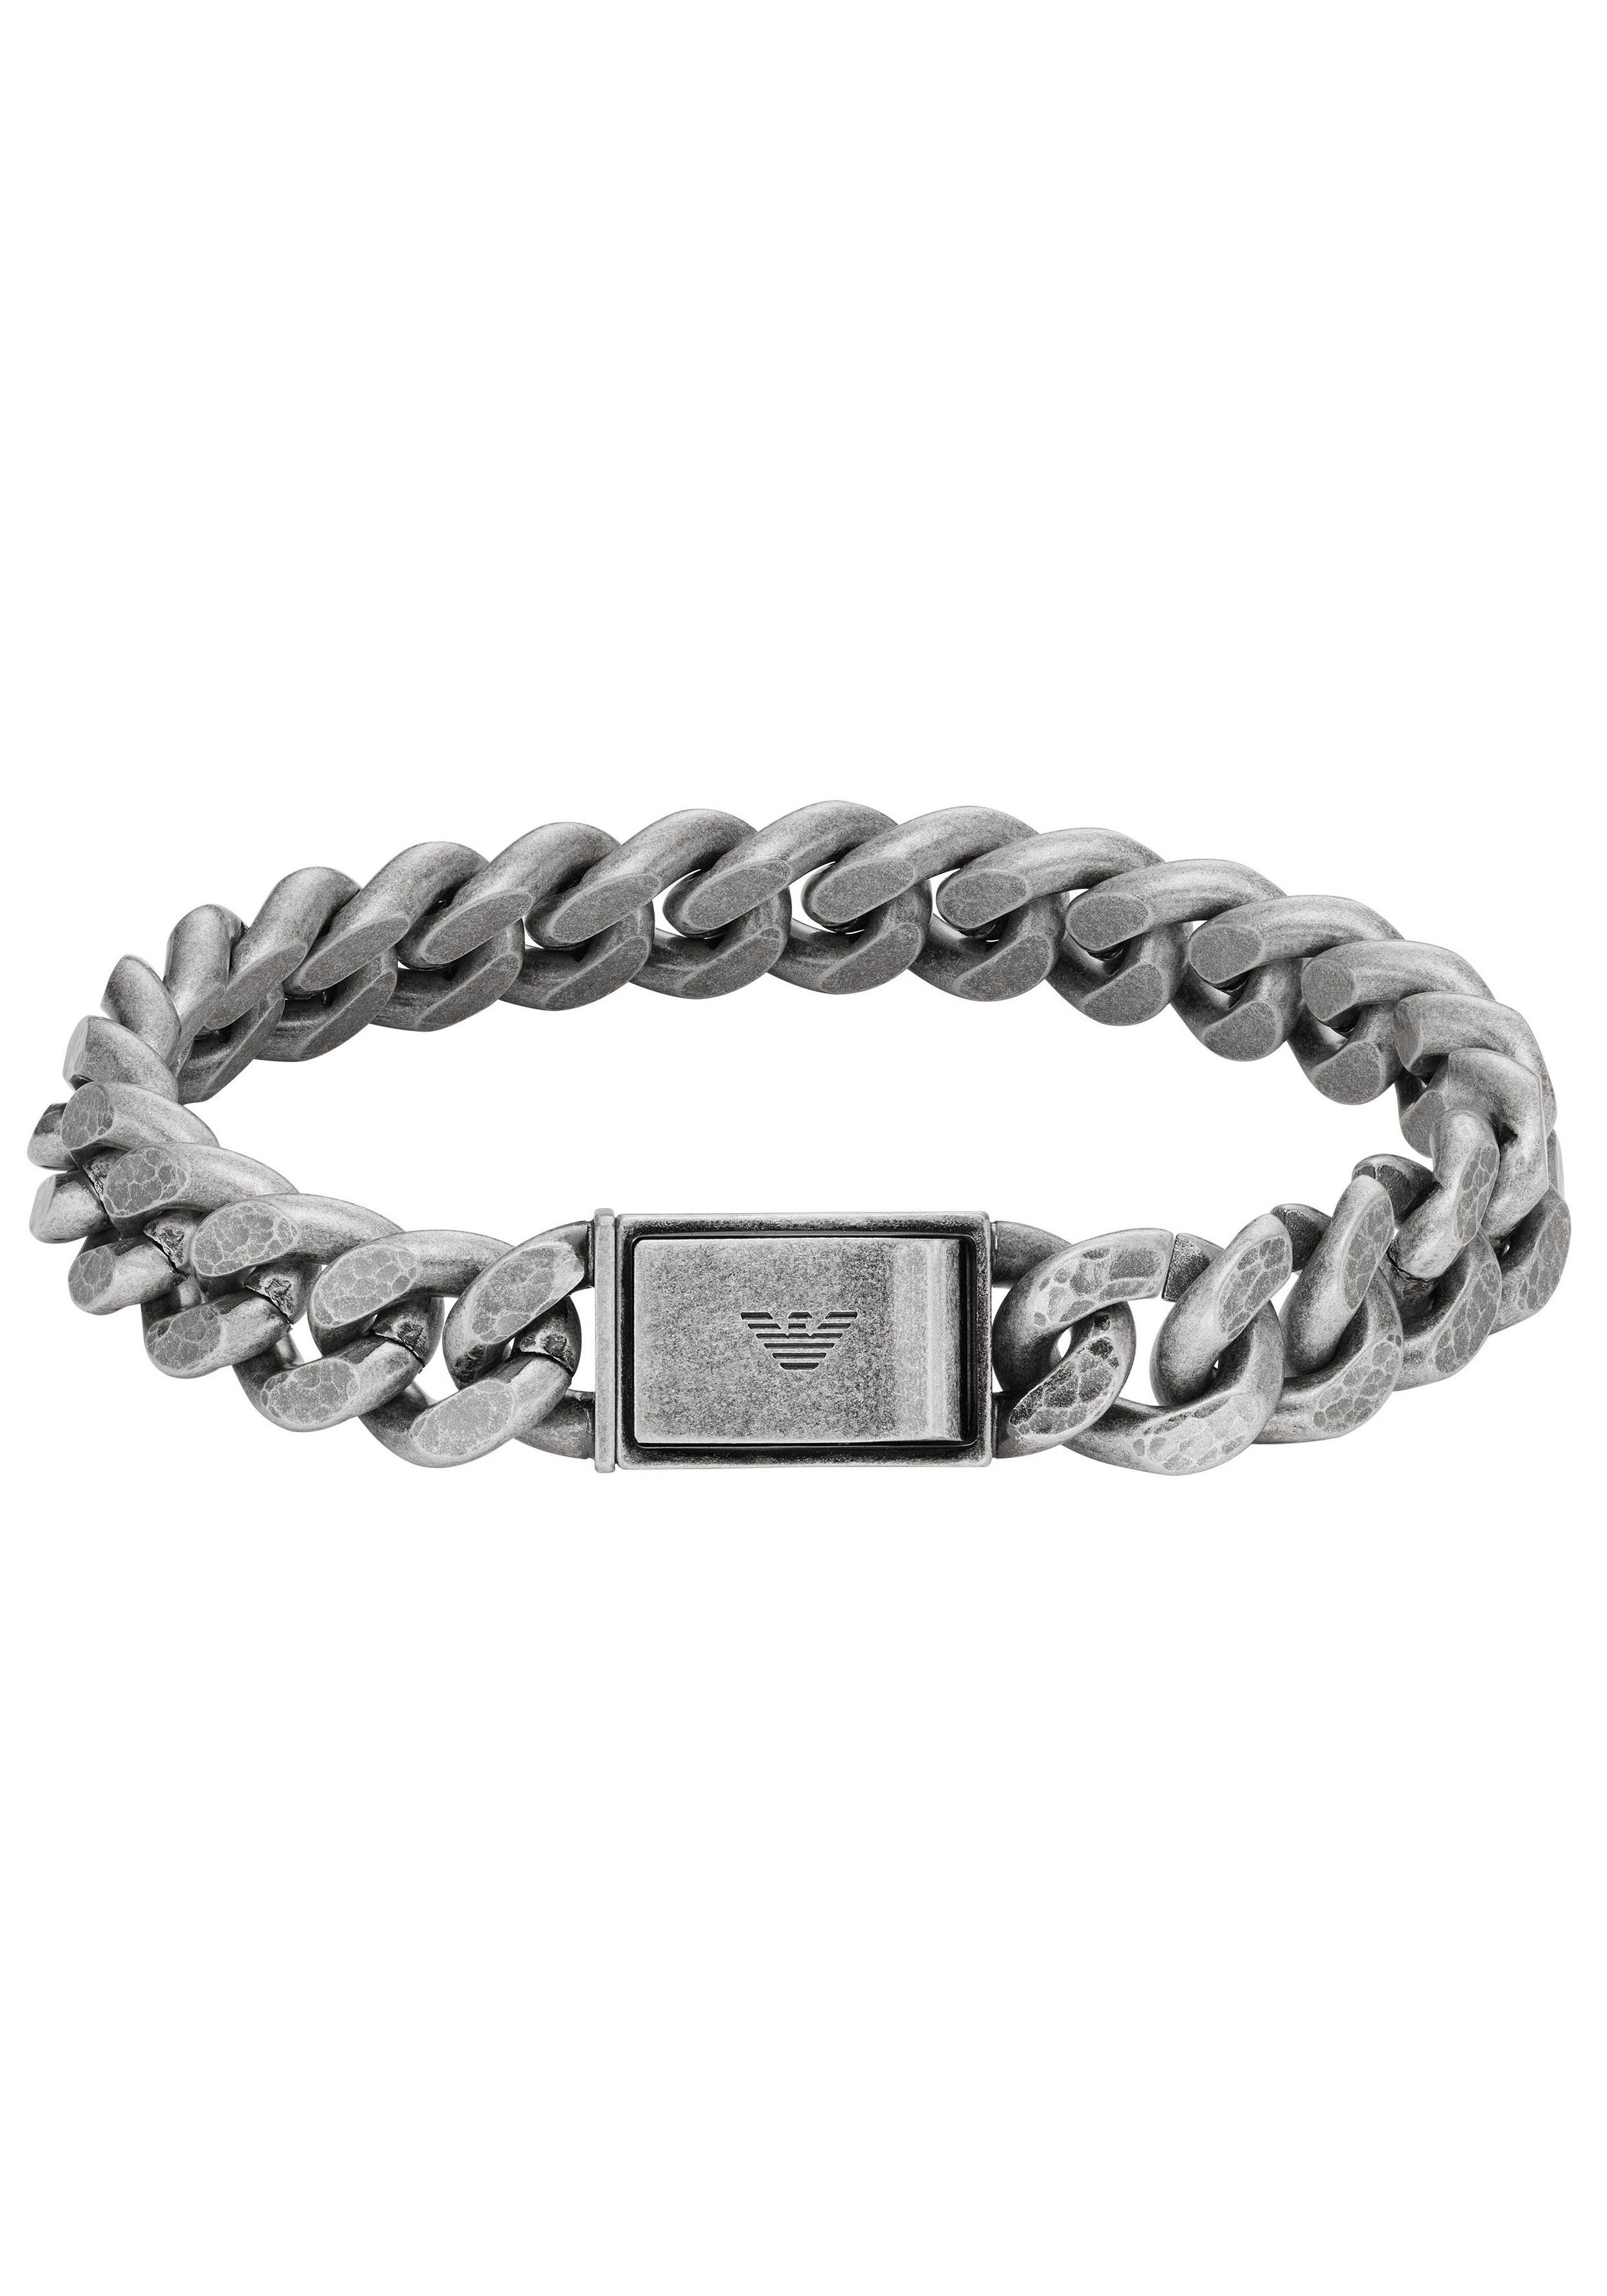 Armani TREND, Emporio ICONIC Armband CHAINED, EGS3036040, Edelstahl